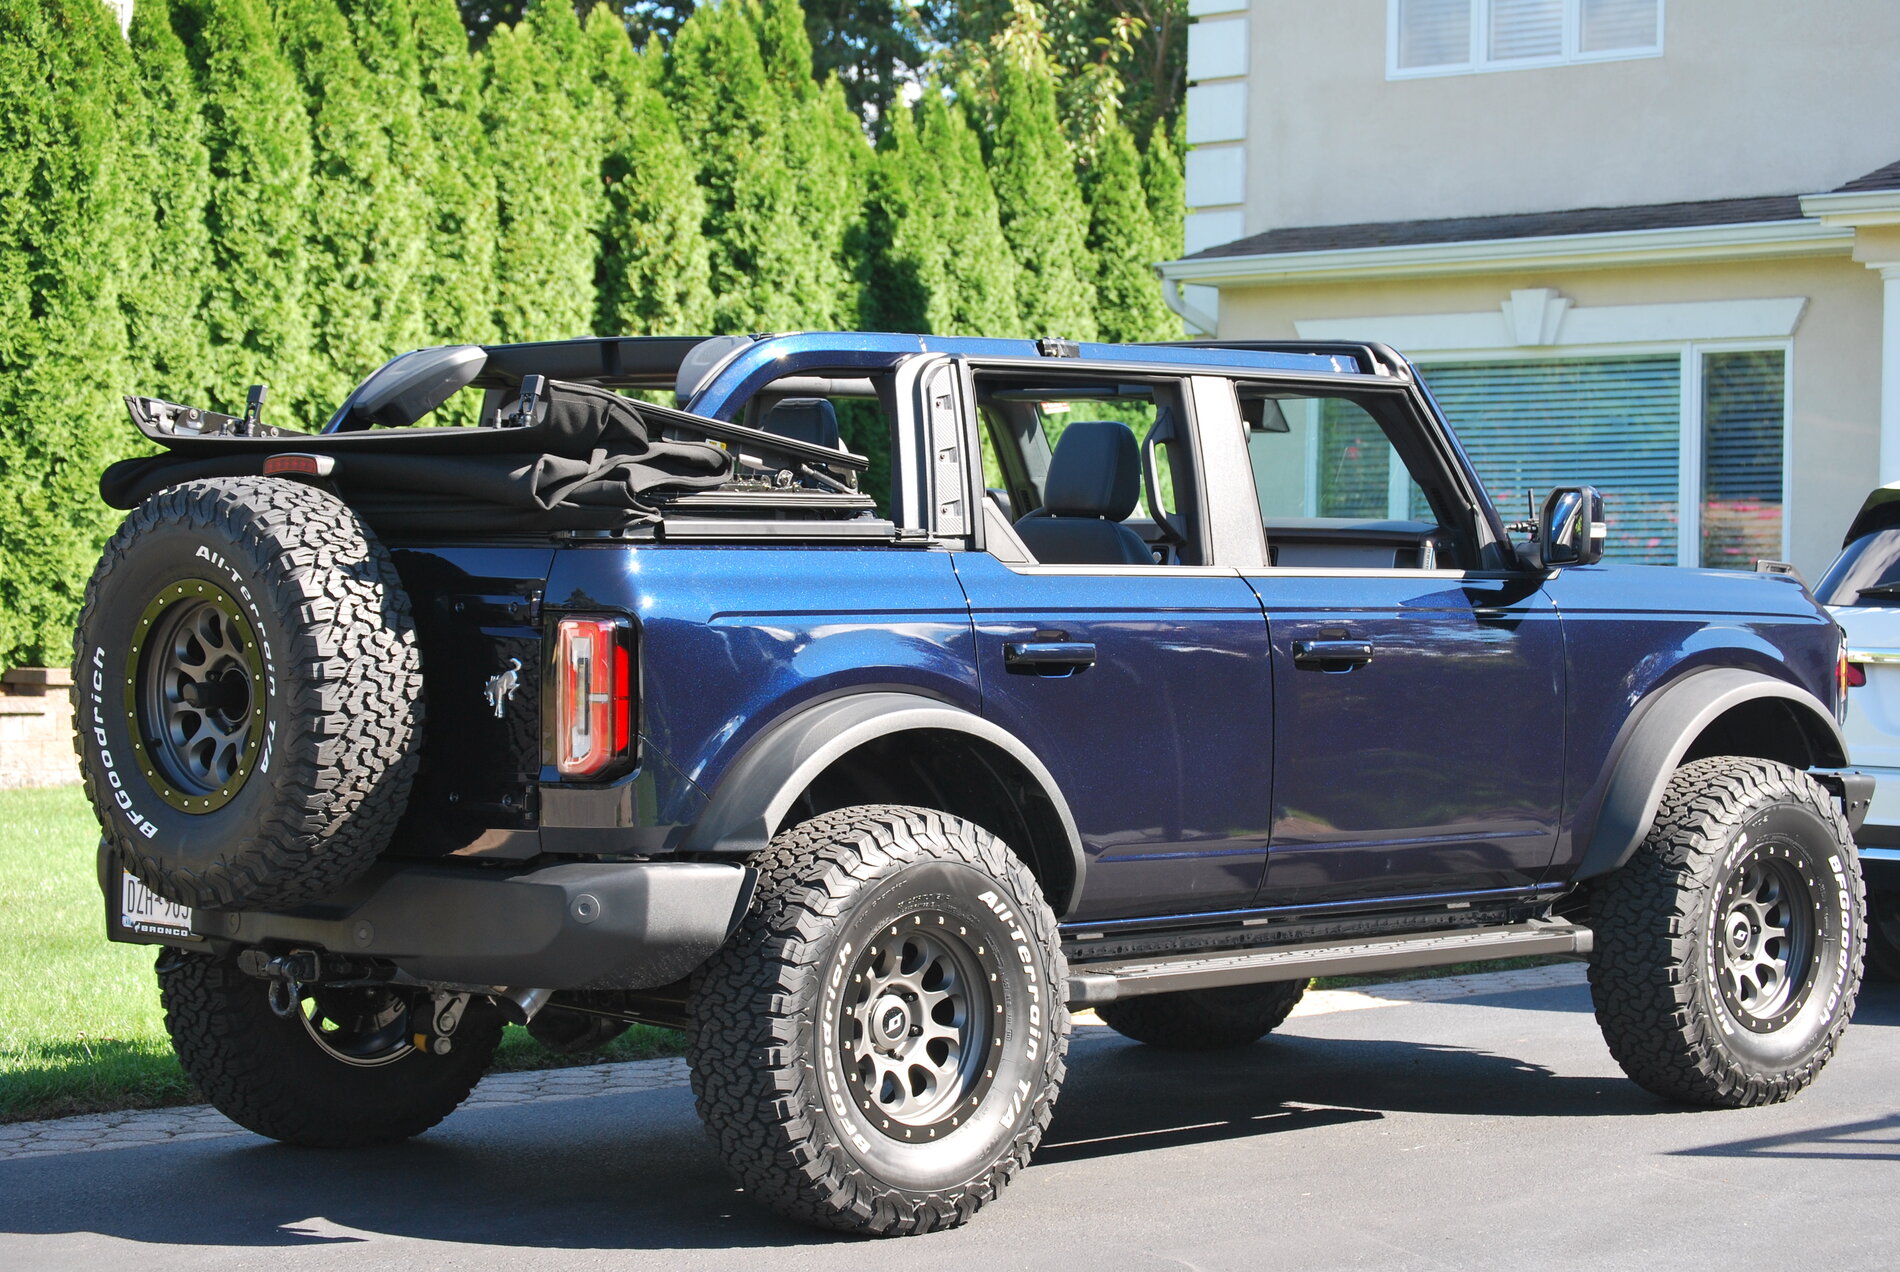 Ford Bronco AMB OBX SAS on 1" Zone Level Kit, 35" K02 Tires, SCS Ray 10 Wheels tempImageWEBsPX